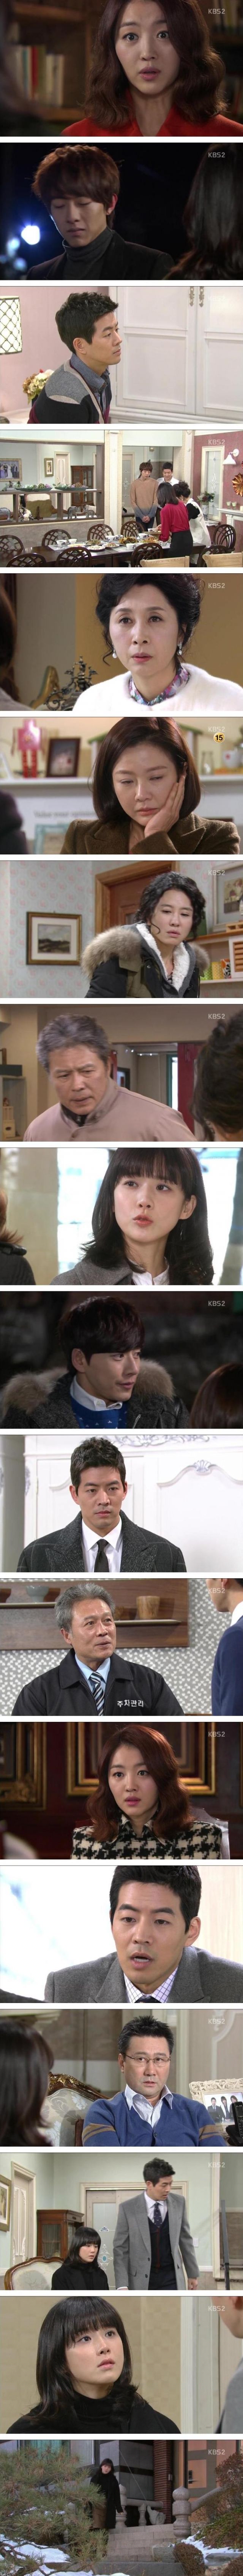 episodes 35 and 36 captures for the Korean drama 'My Daughter Seo-yeong'